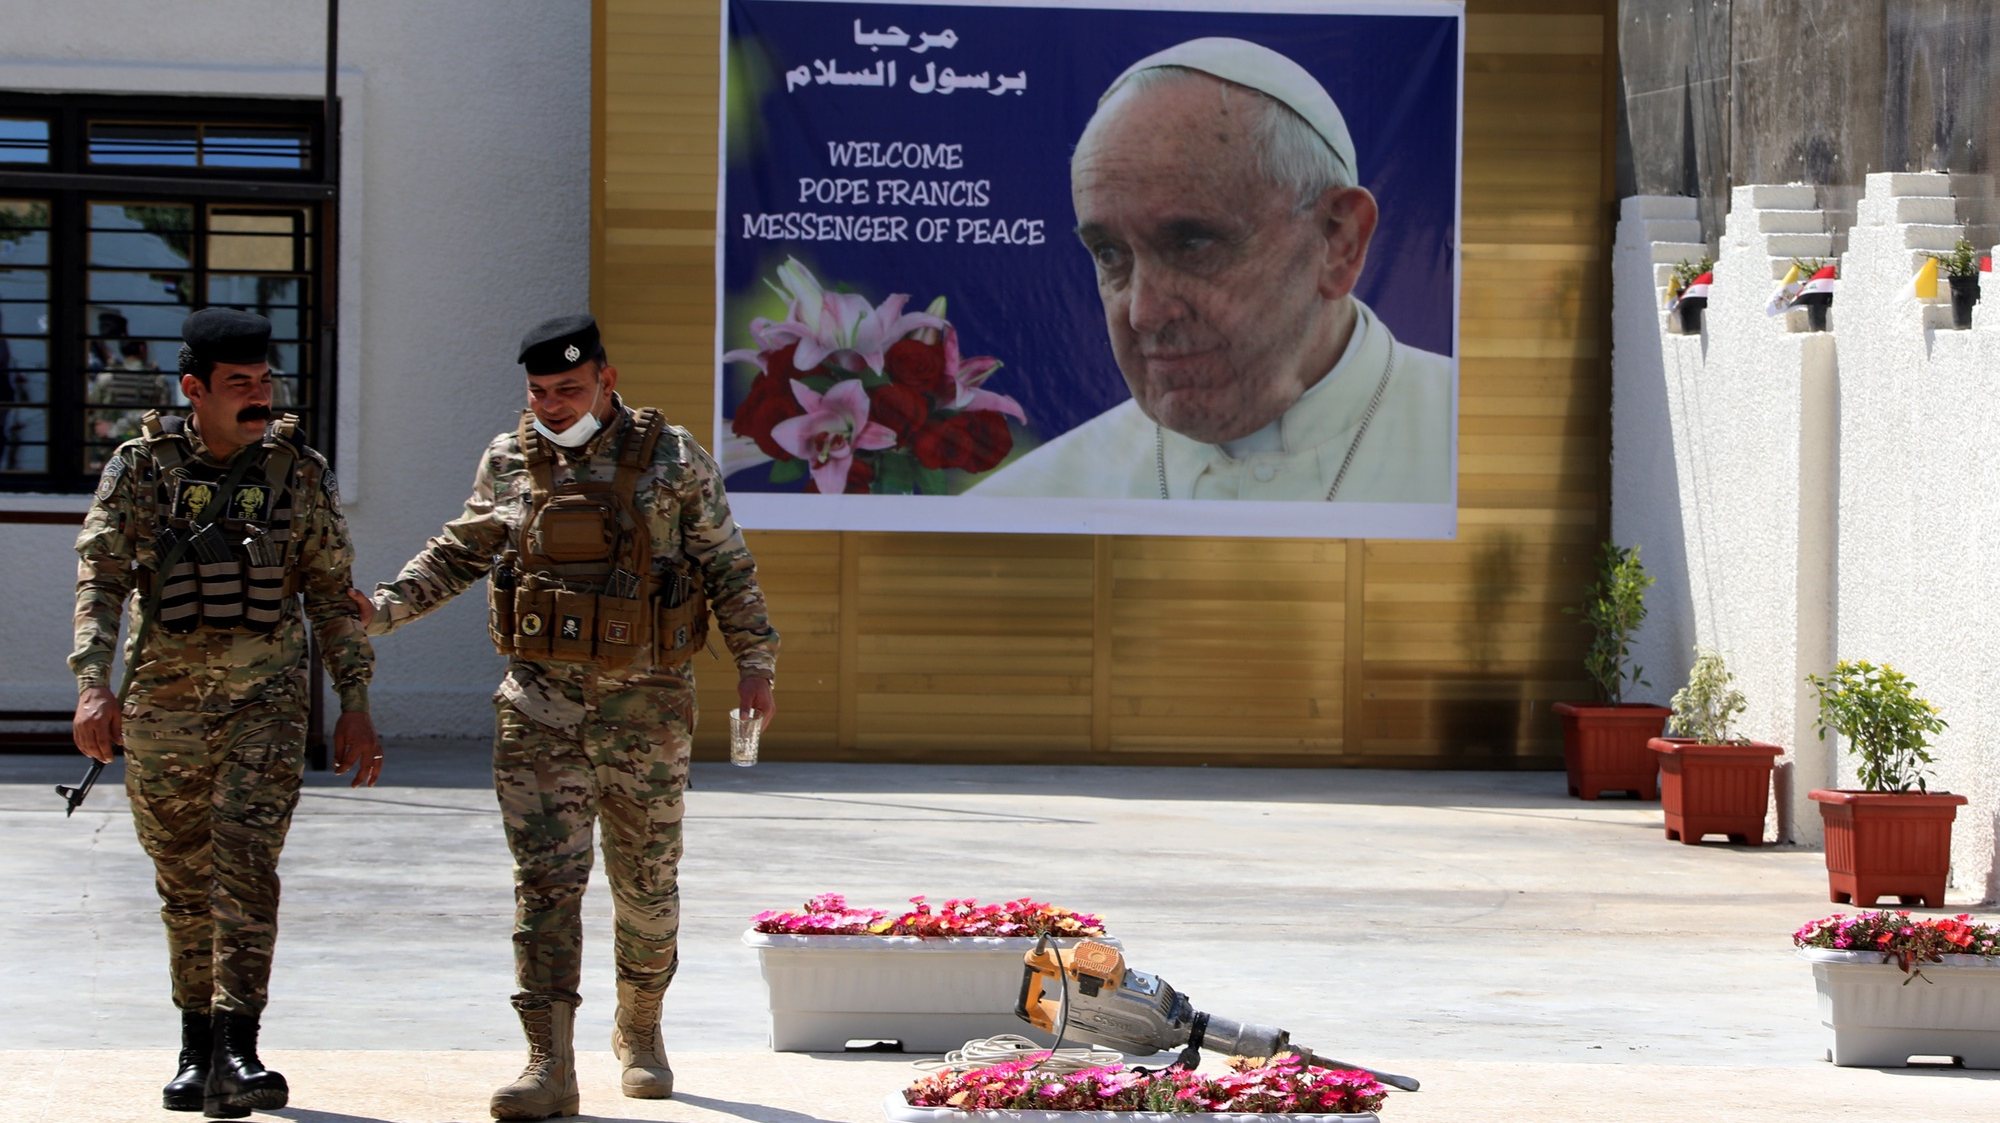 epaselect epa09044899 Iraqi policemen walk next to a posters depicting the picture of Pope Francis at the St. Joseph Chaldean Catholic Church in Baghdad&#039;s Karada district, Iraq on 01 March 2021. Pope Francis will visit St. Joseph church in Baghdad, during his trip to Iraq from 05 to 08 March 2021.  EPA/AHMED JALIL